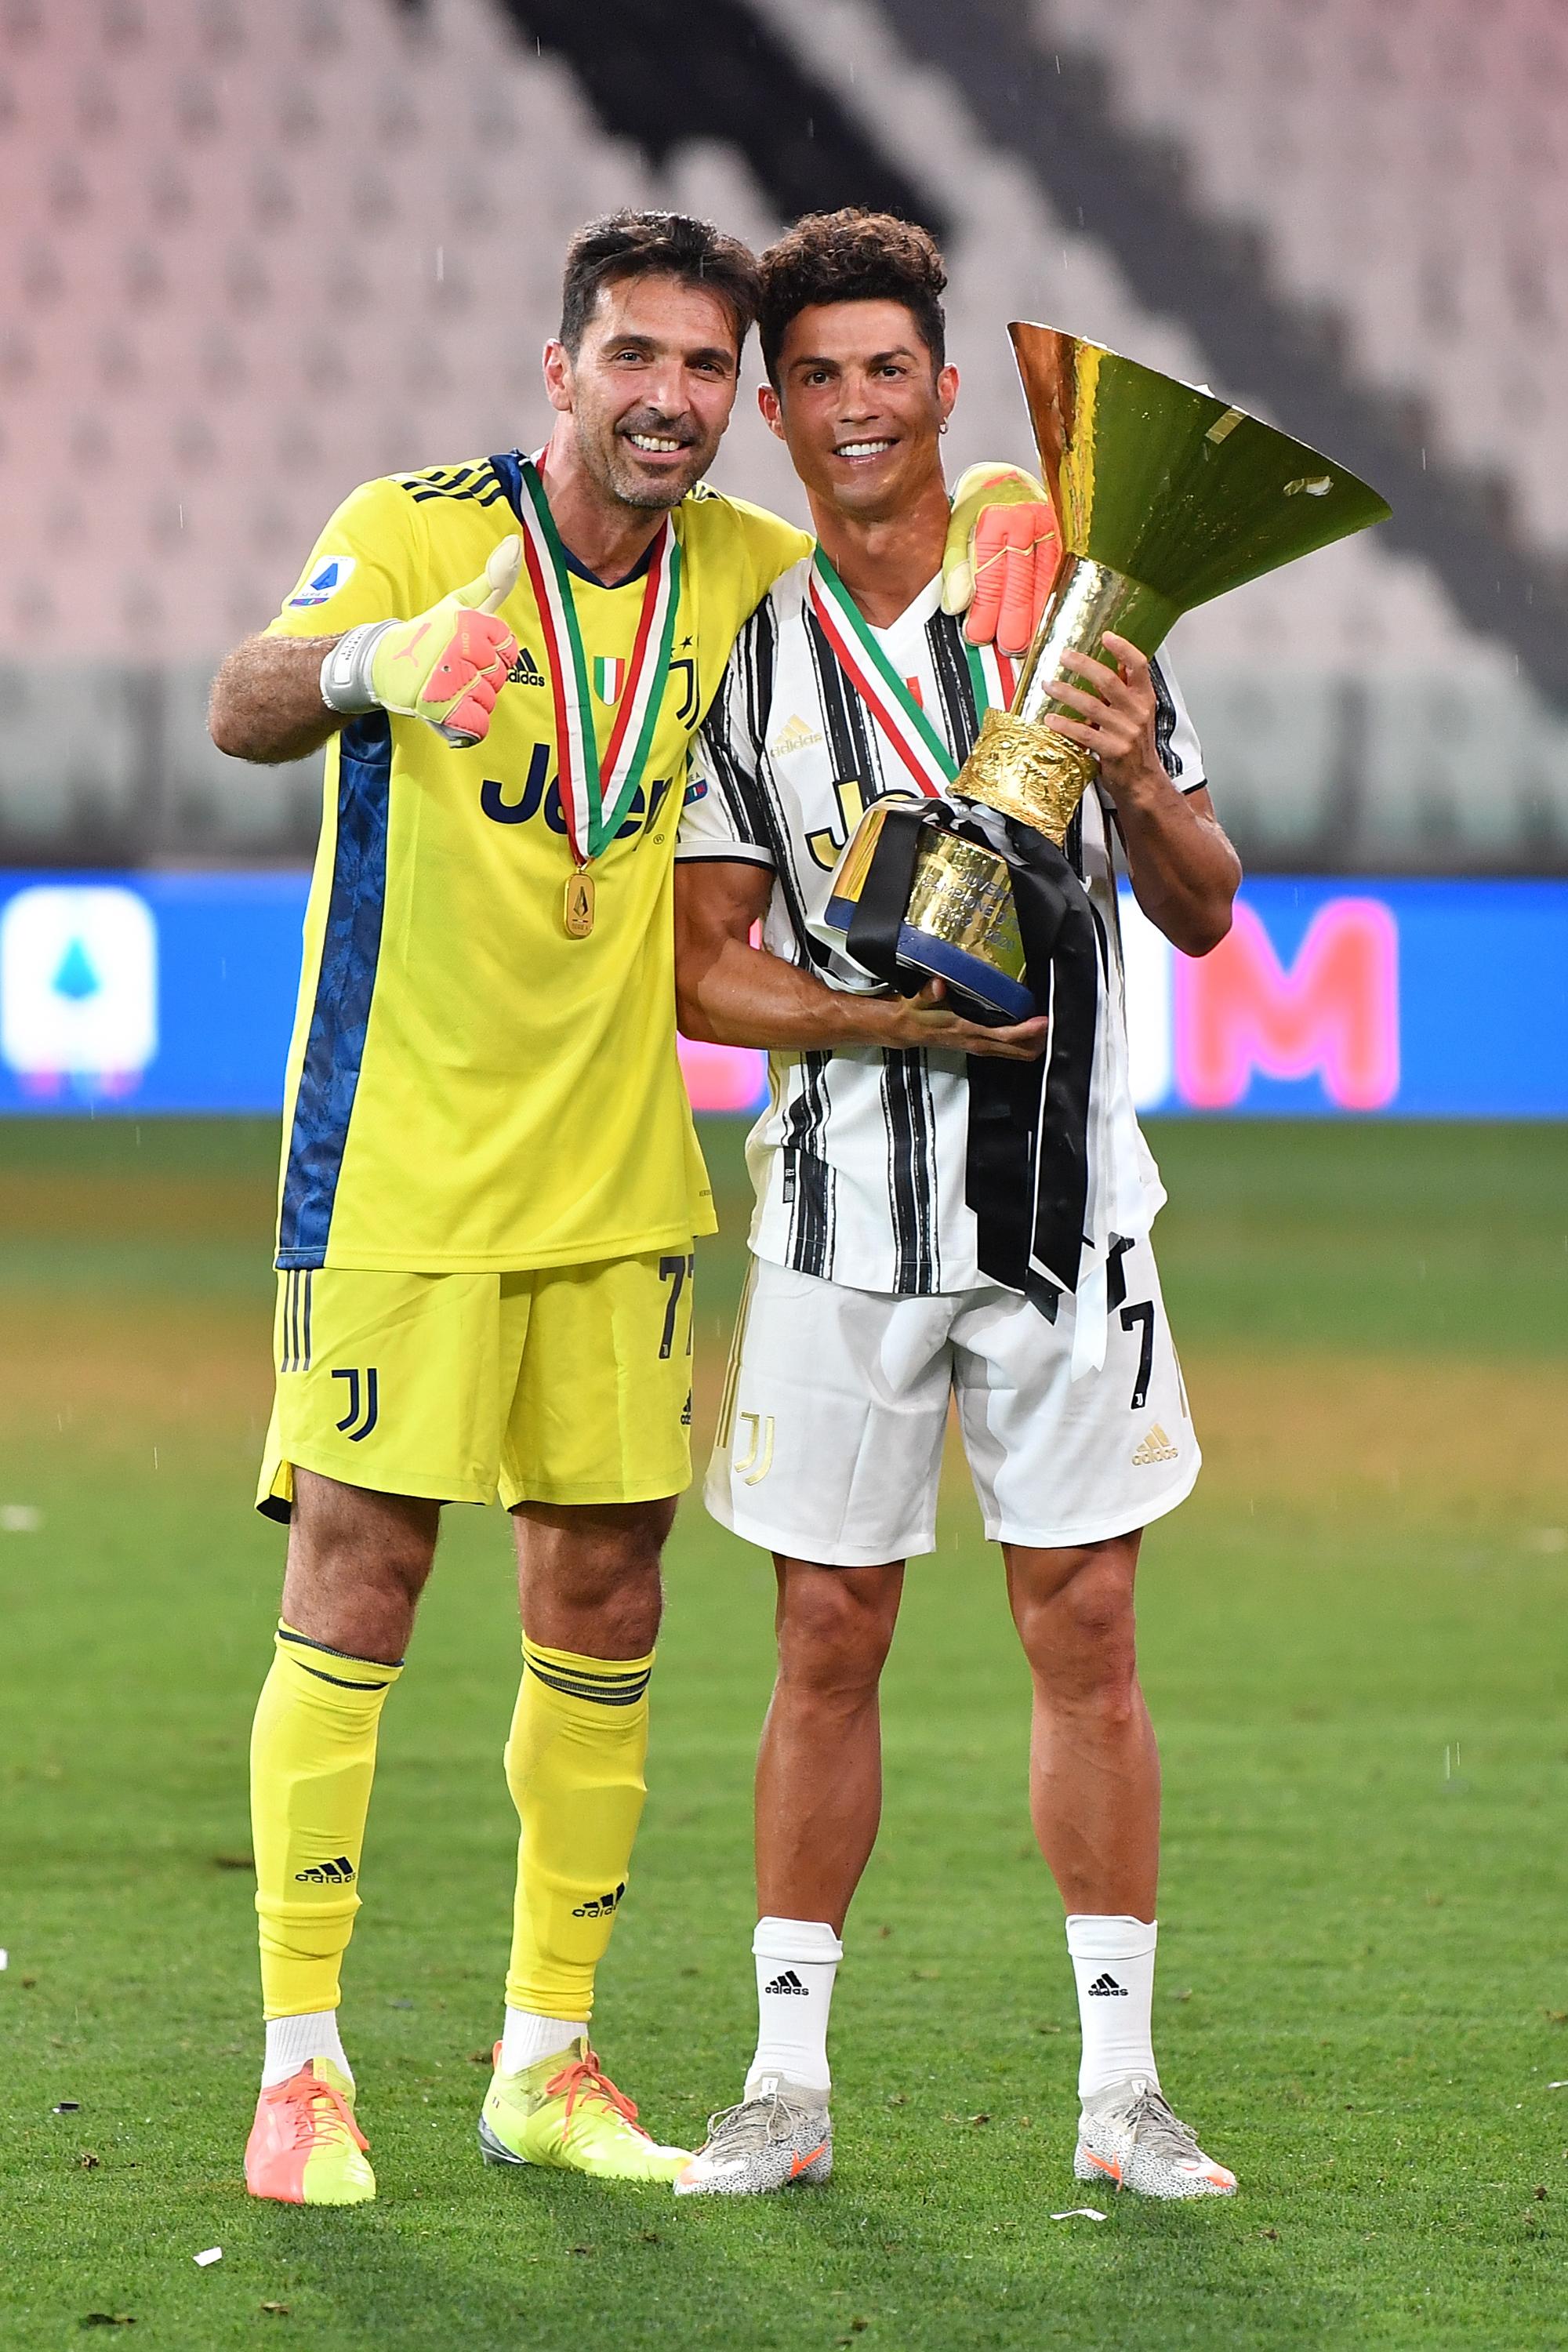 Cristiano Ronaldo( on the right) poses for a photo with Buffon ( on the left)